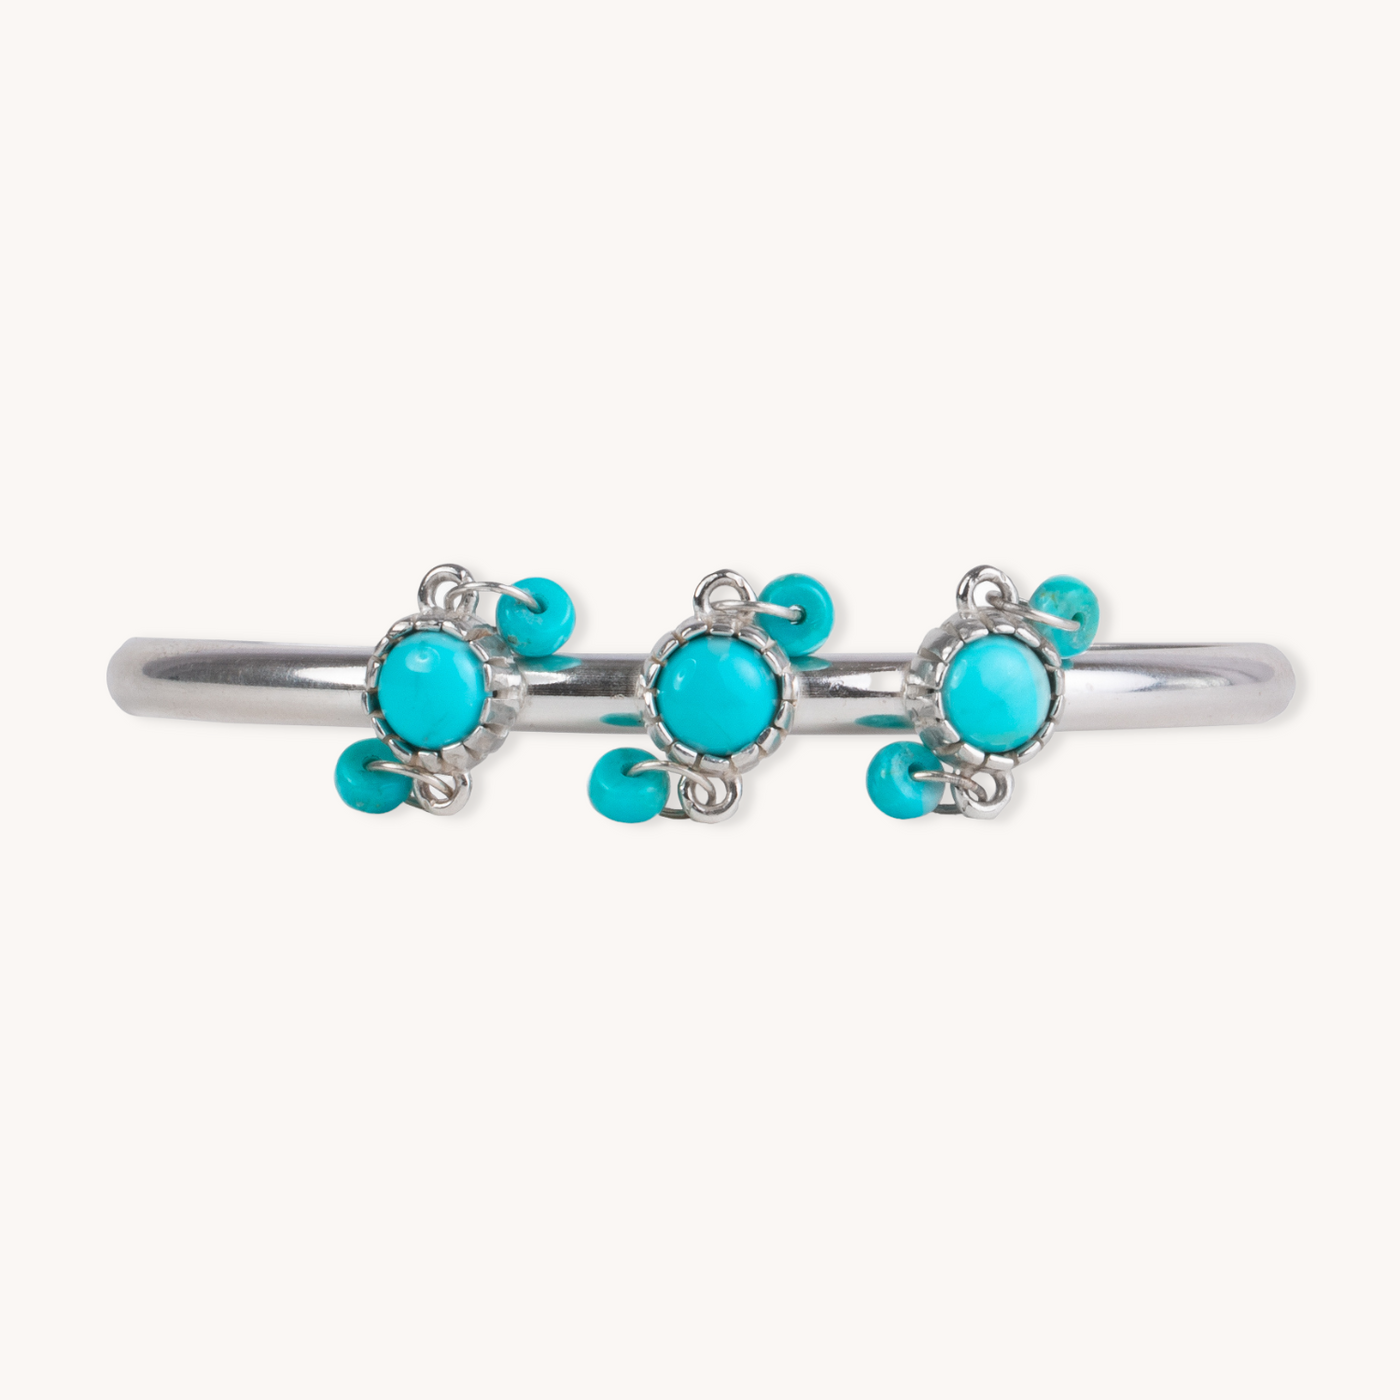 Turquoise and Silver Cuff Bracelet by TSkies